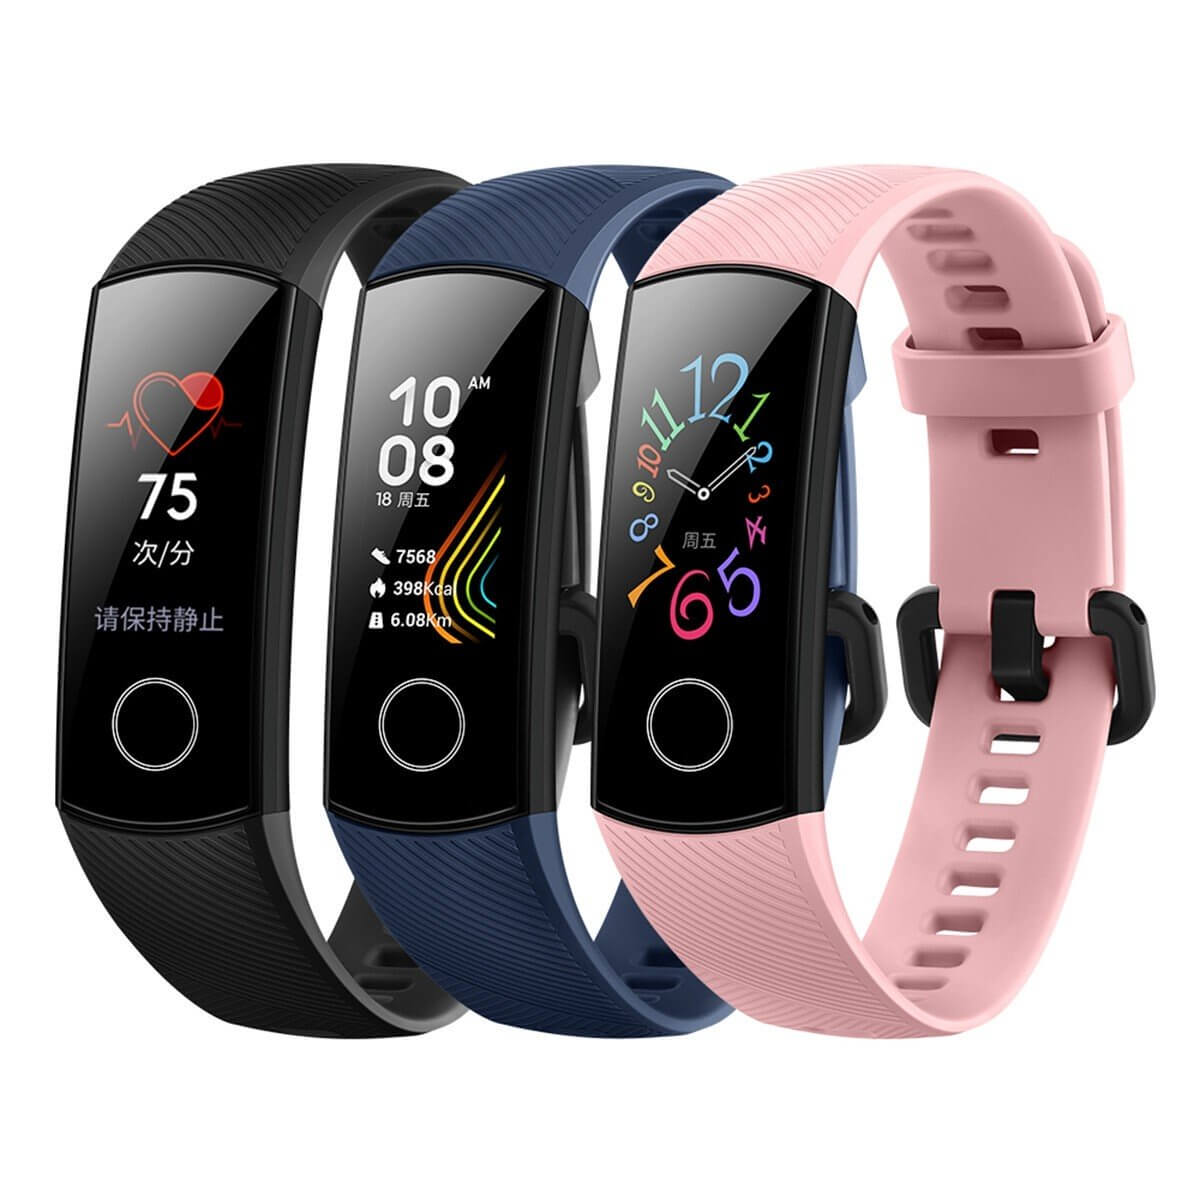 Honor Band 5 Smart Band Global Version Blood Oxygen Smartwatch AMOLED  Heart Rate Fitness Sleep Tracker